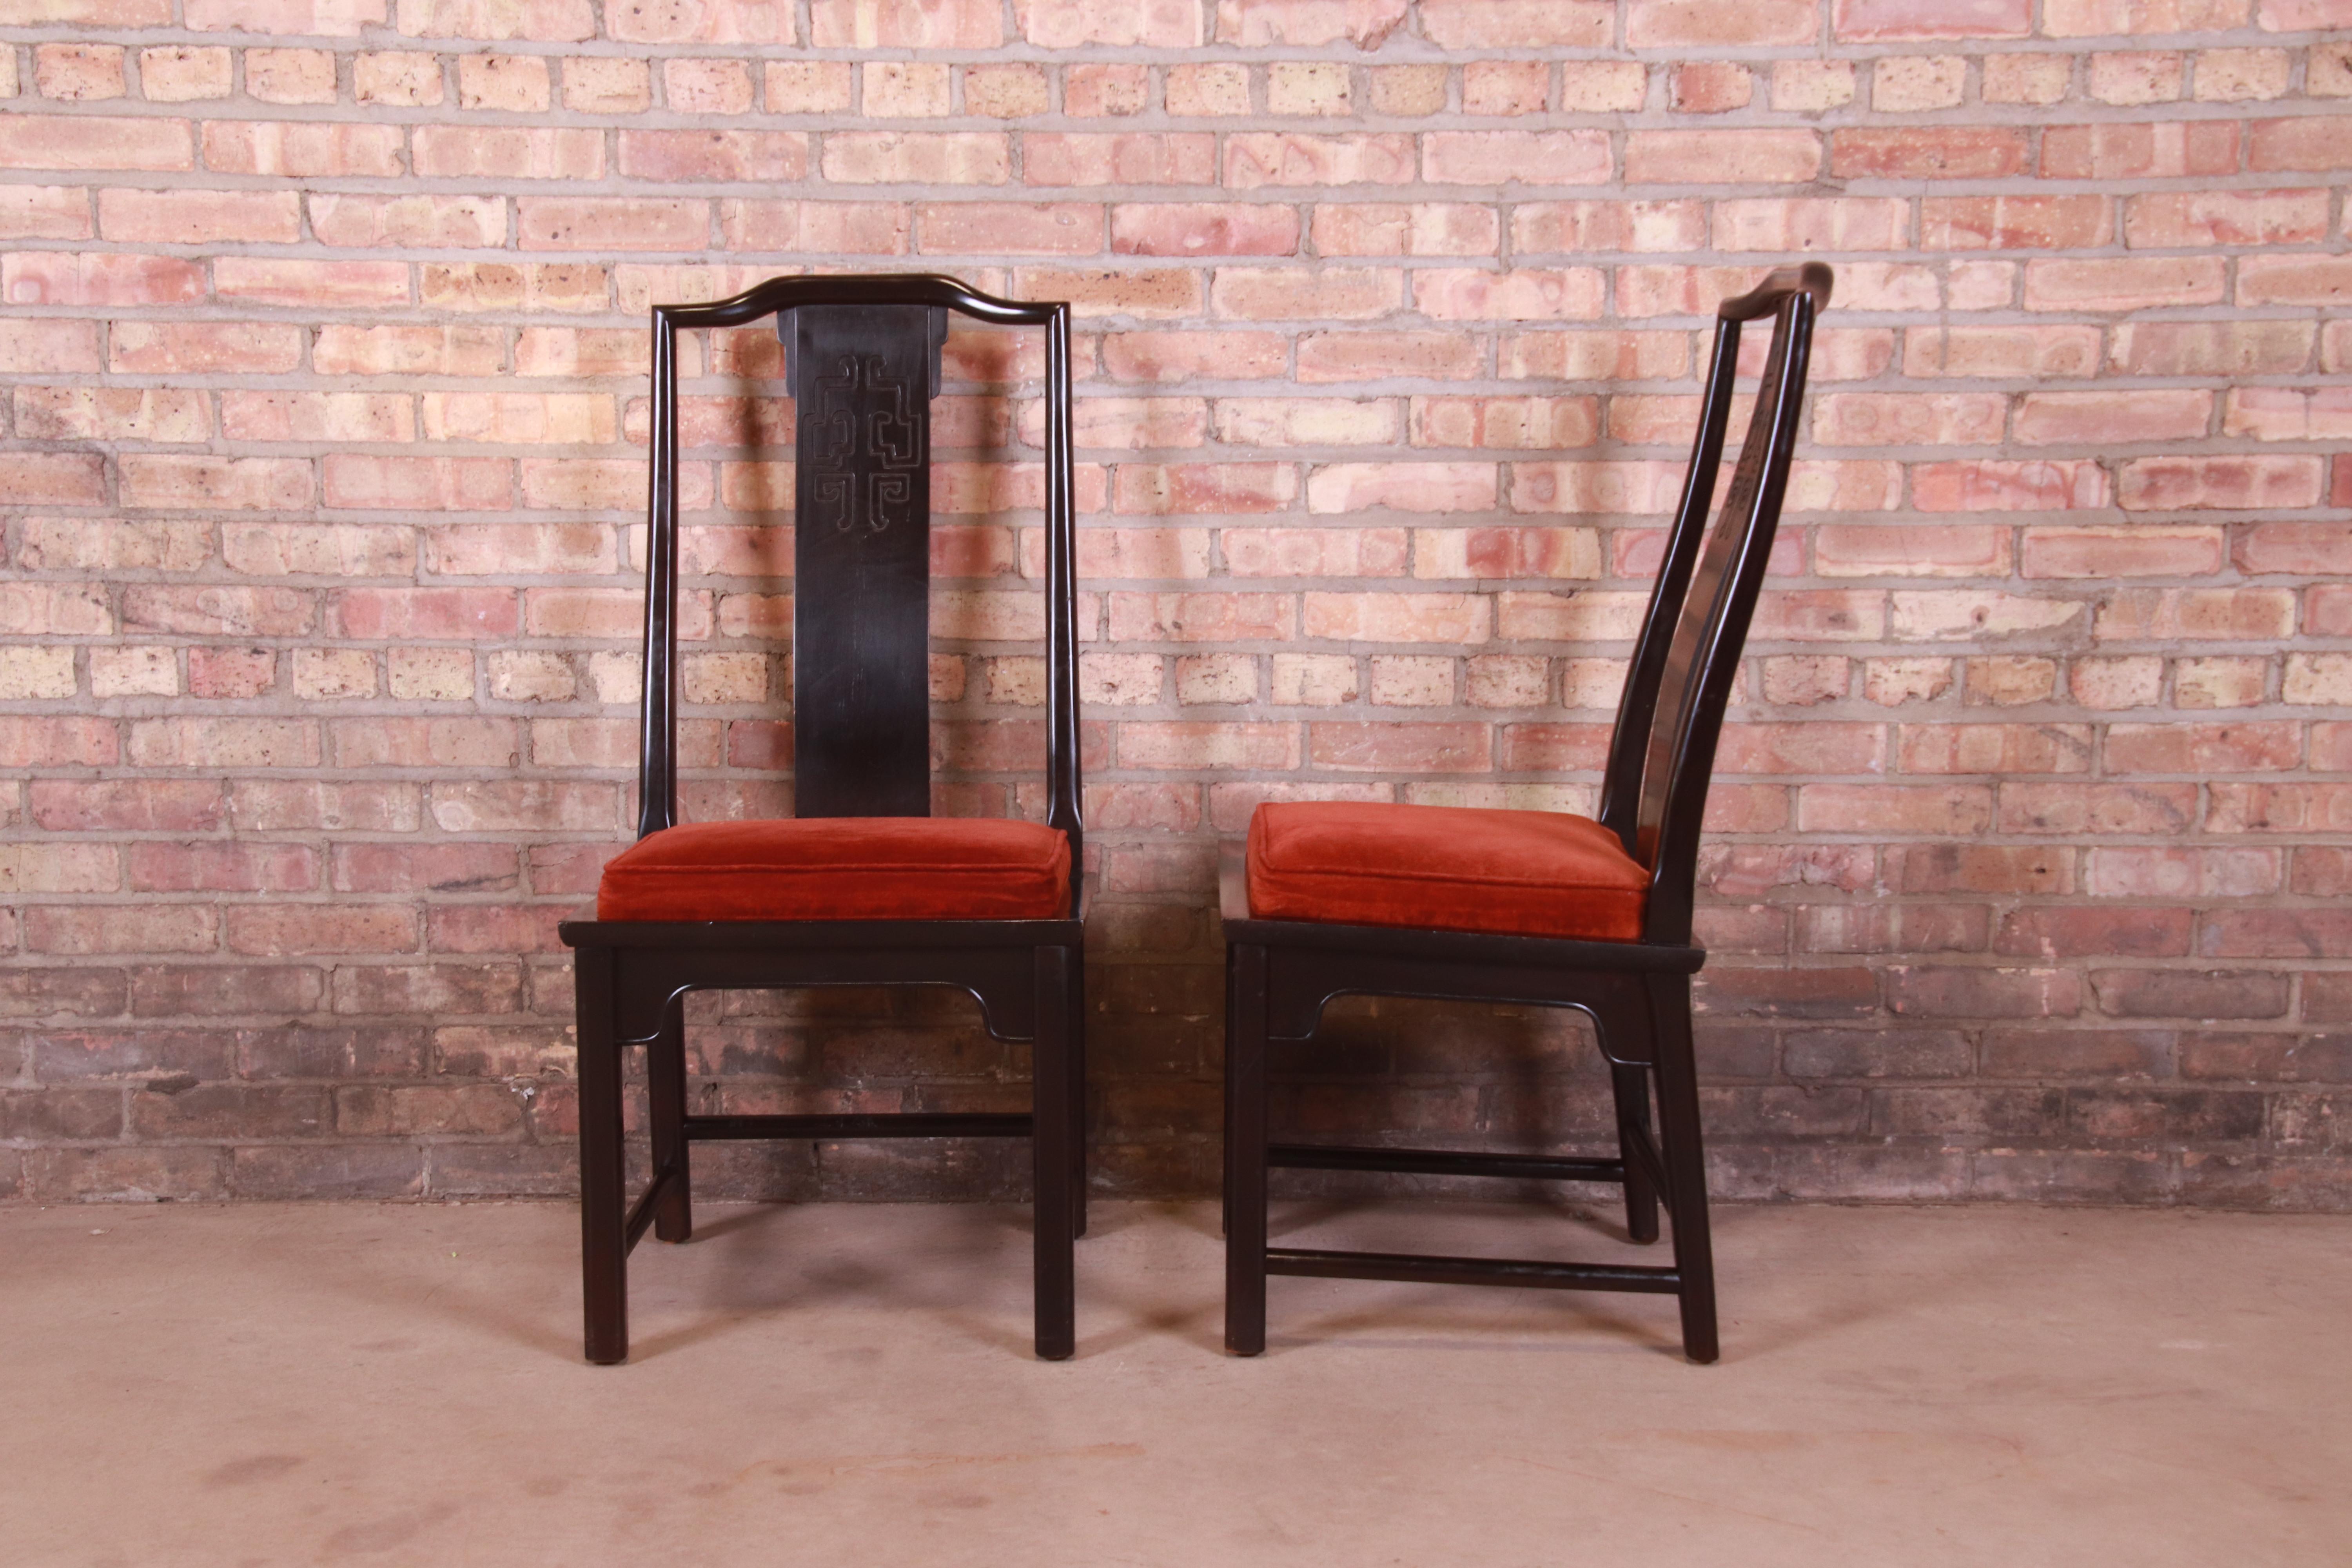 Upholstery Century Furniture Hollywood Regency Chinoiserie Black Lacquered Dining Chairs